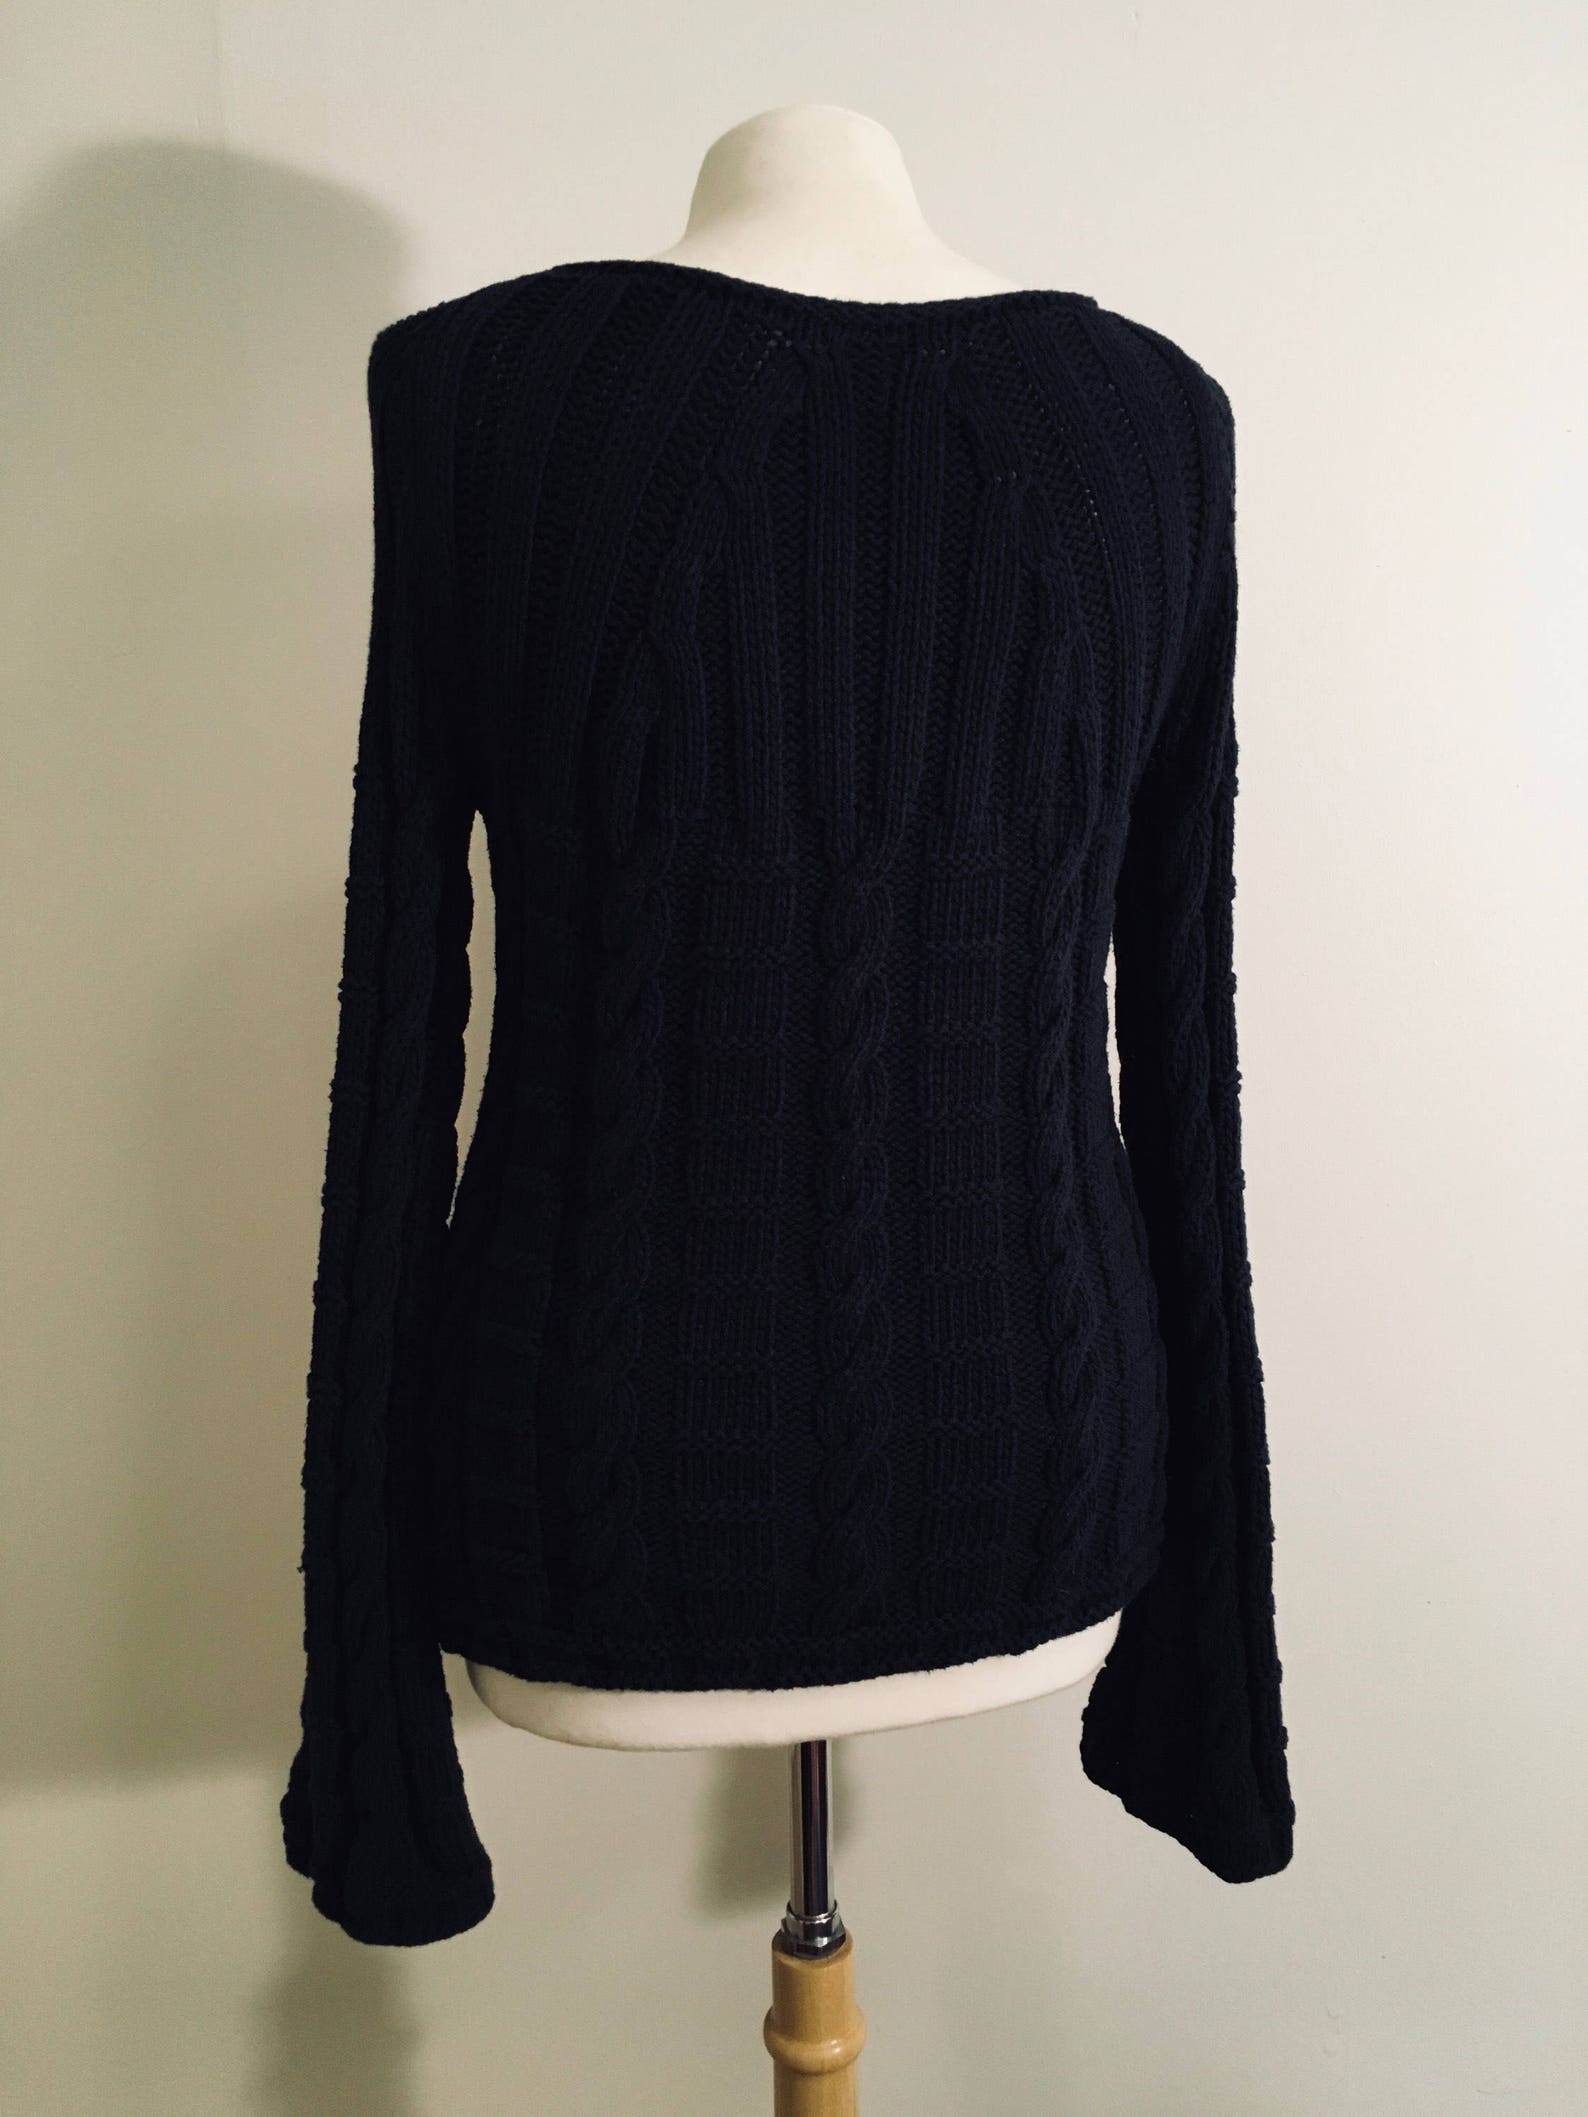 Vintage BCBG cardigan navy blue knitted 100% cotton sweater xs | Etsy